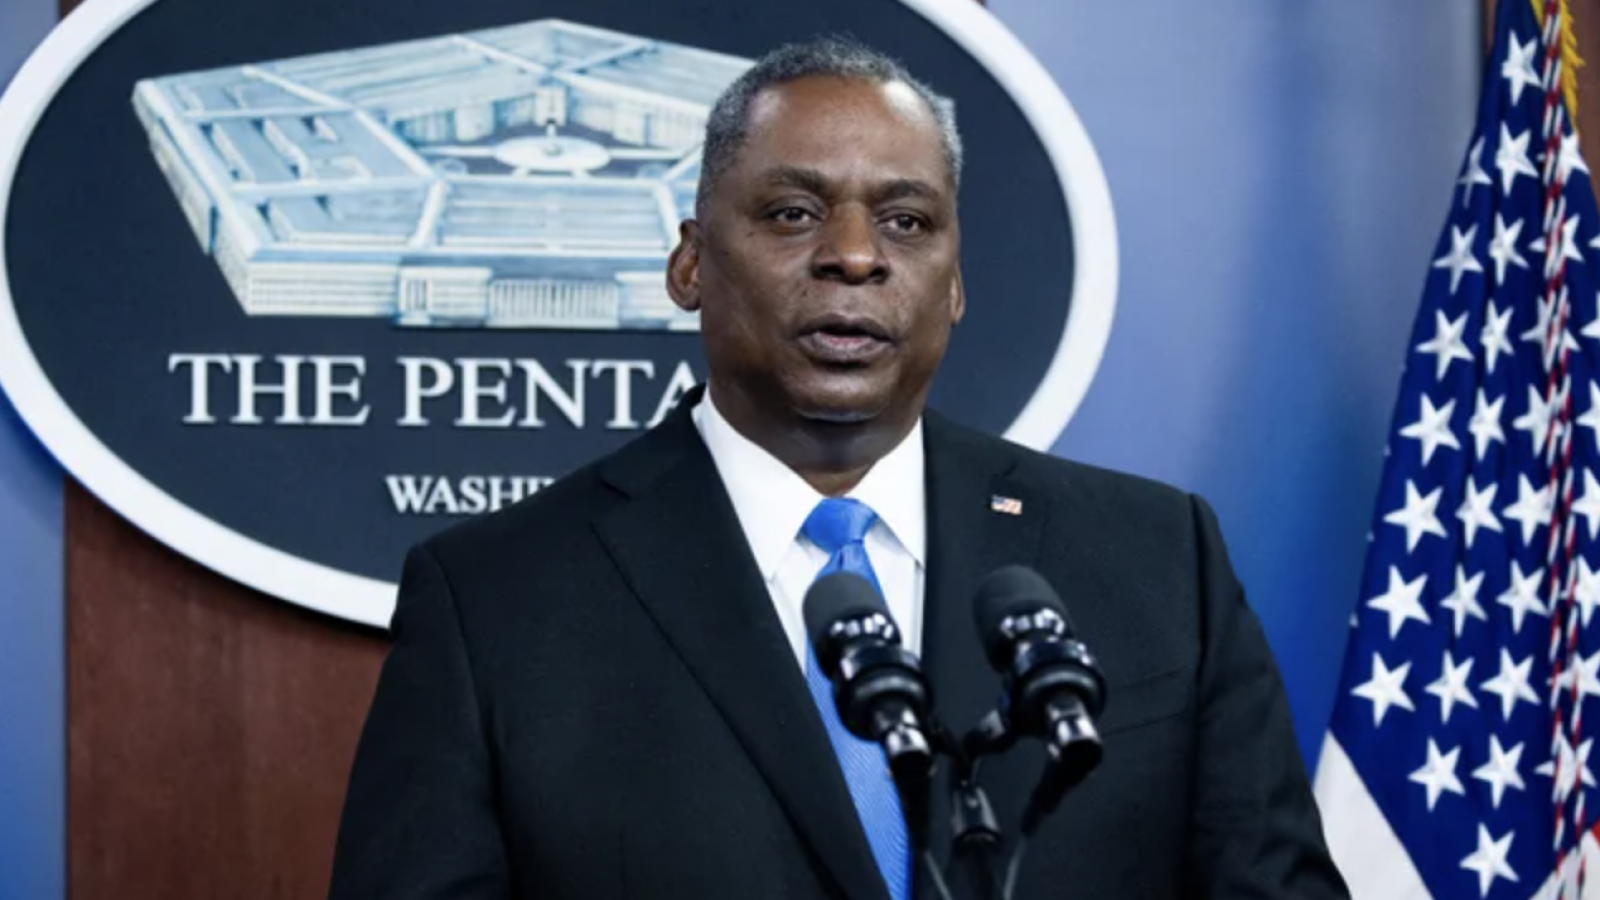 Secretary of Defense Lloyd Austin speaks at a podium in front of the Pentagon seal and an American flag